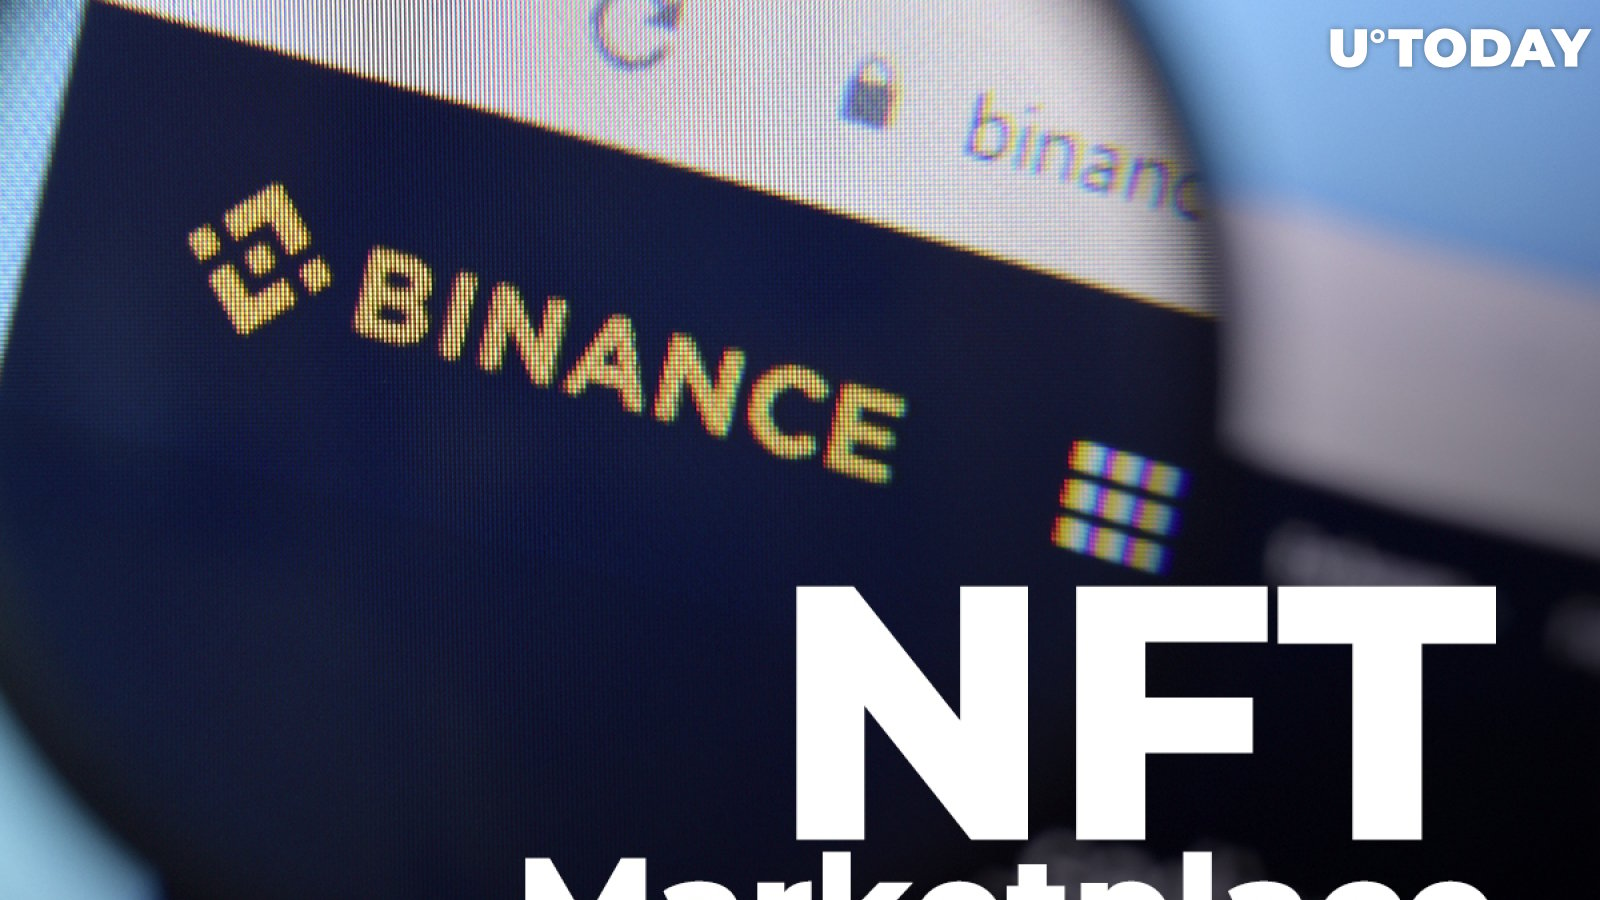 Binance's NFT Marketplace Launches Digital Auction in Collaboration with Tron and APENFT